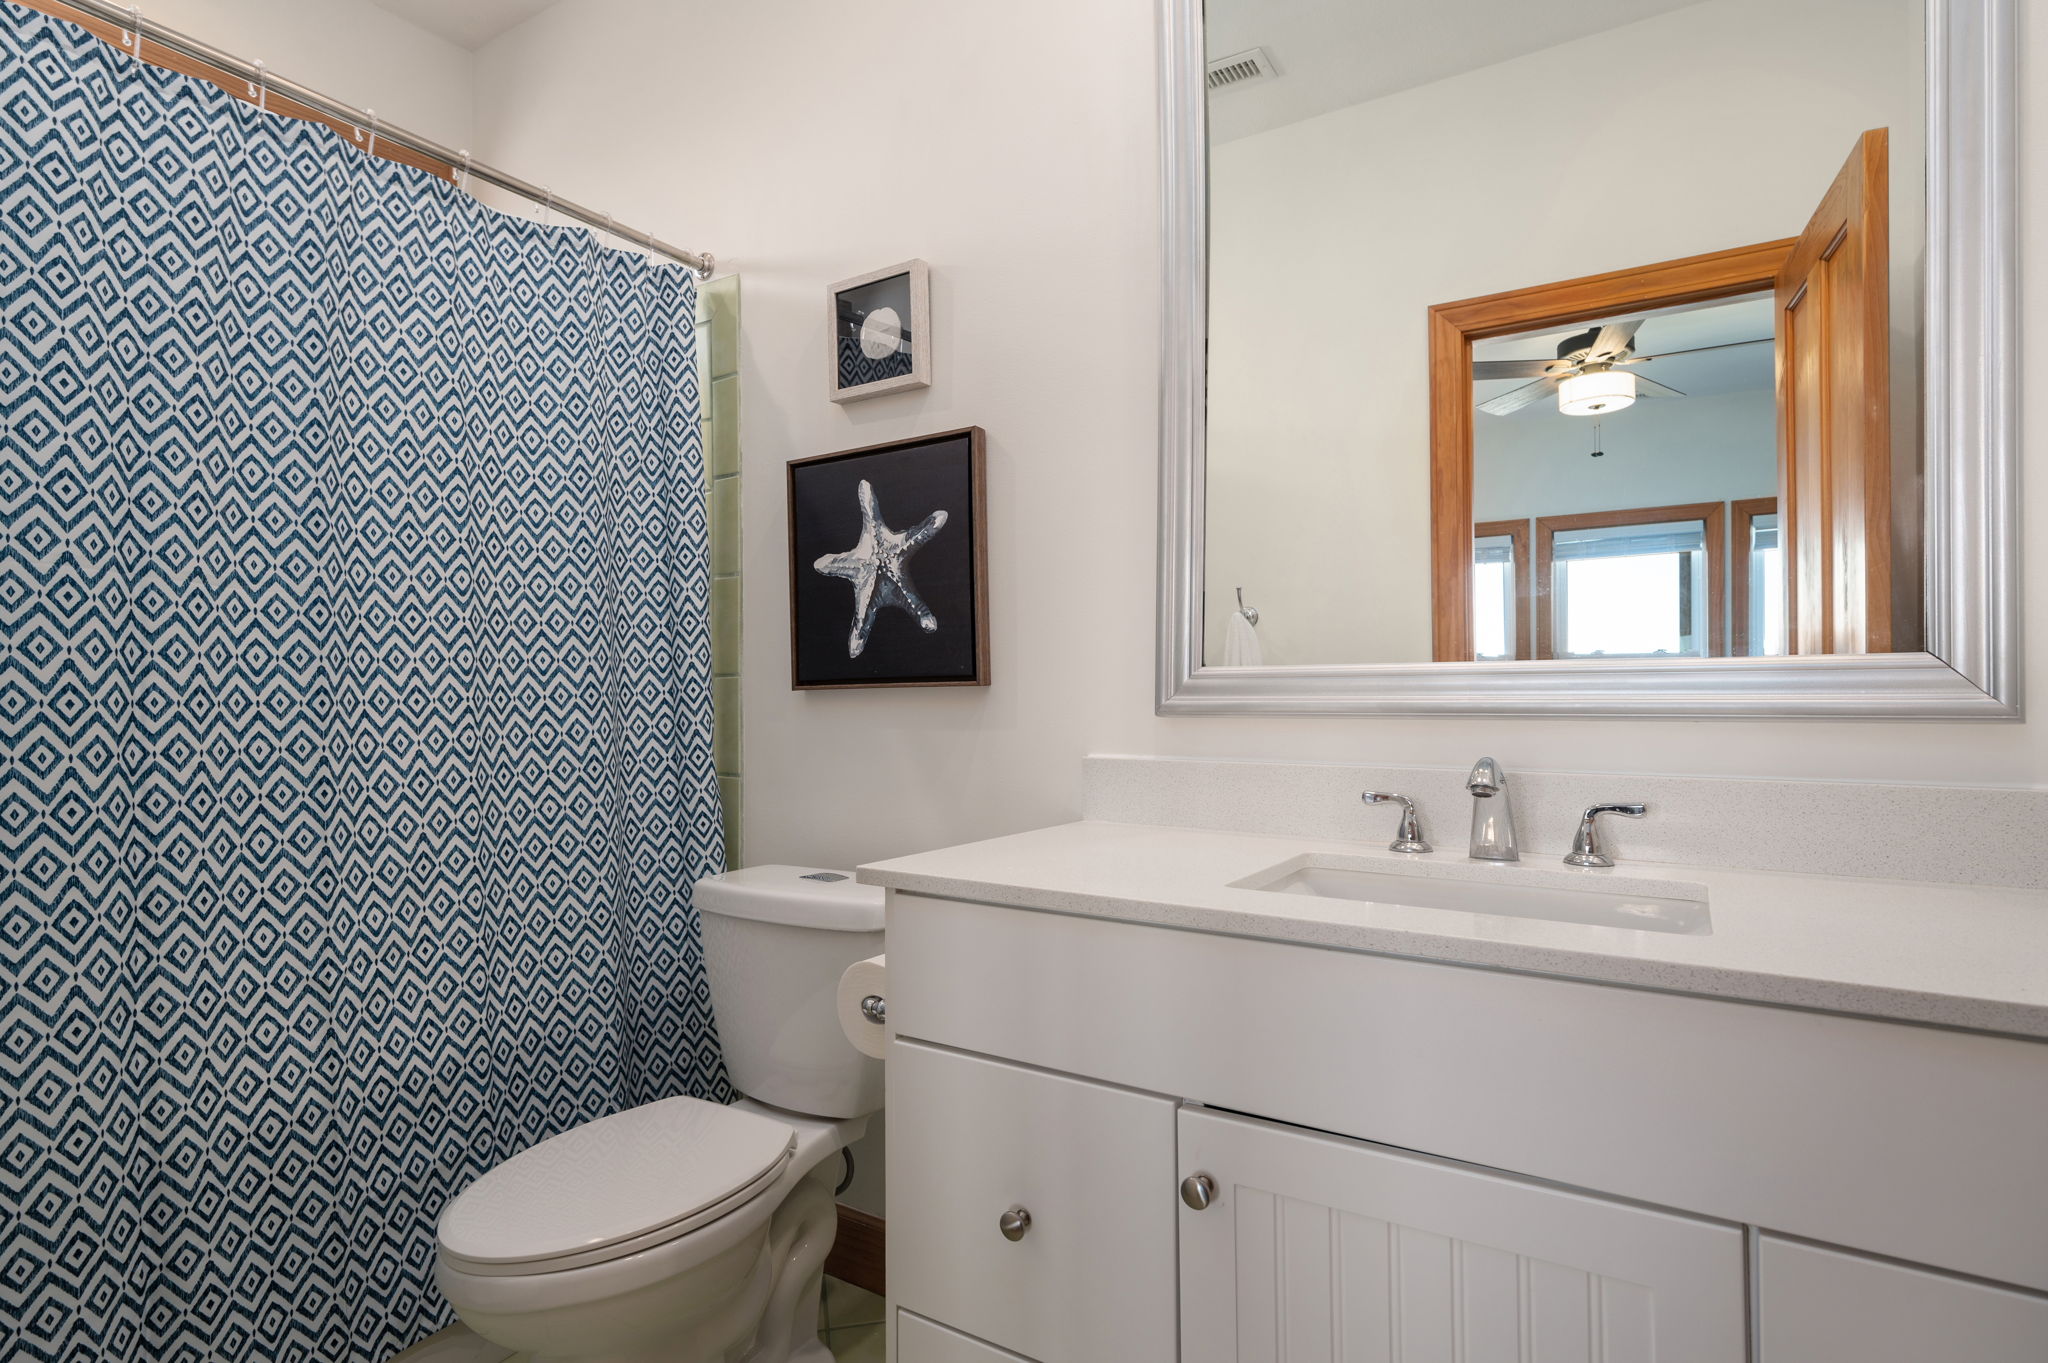 57216 Summerplace Dr | Mid Level Bedroom 6 - Private Bath